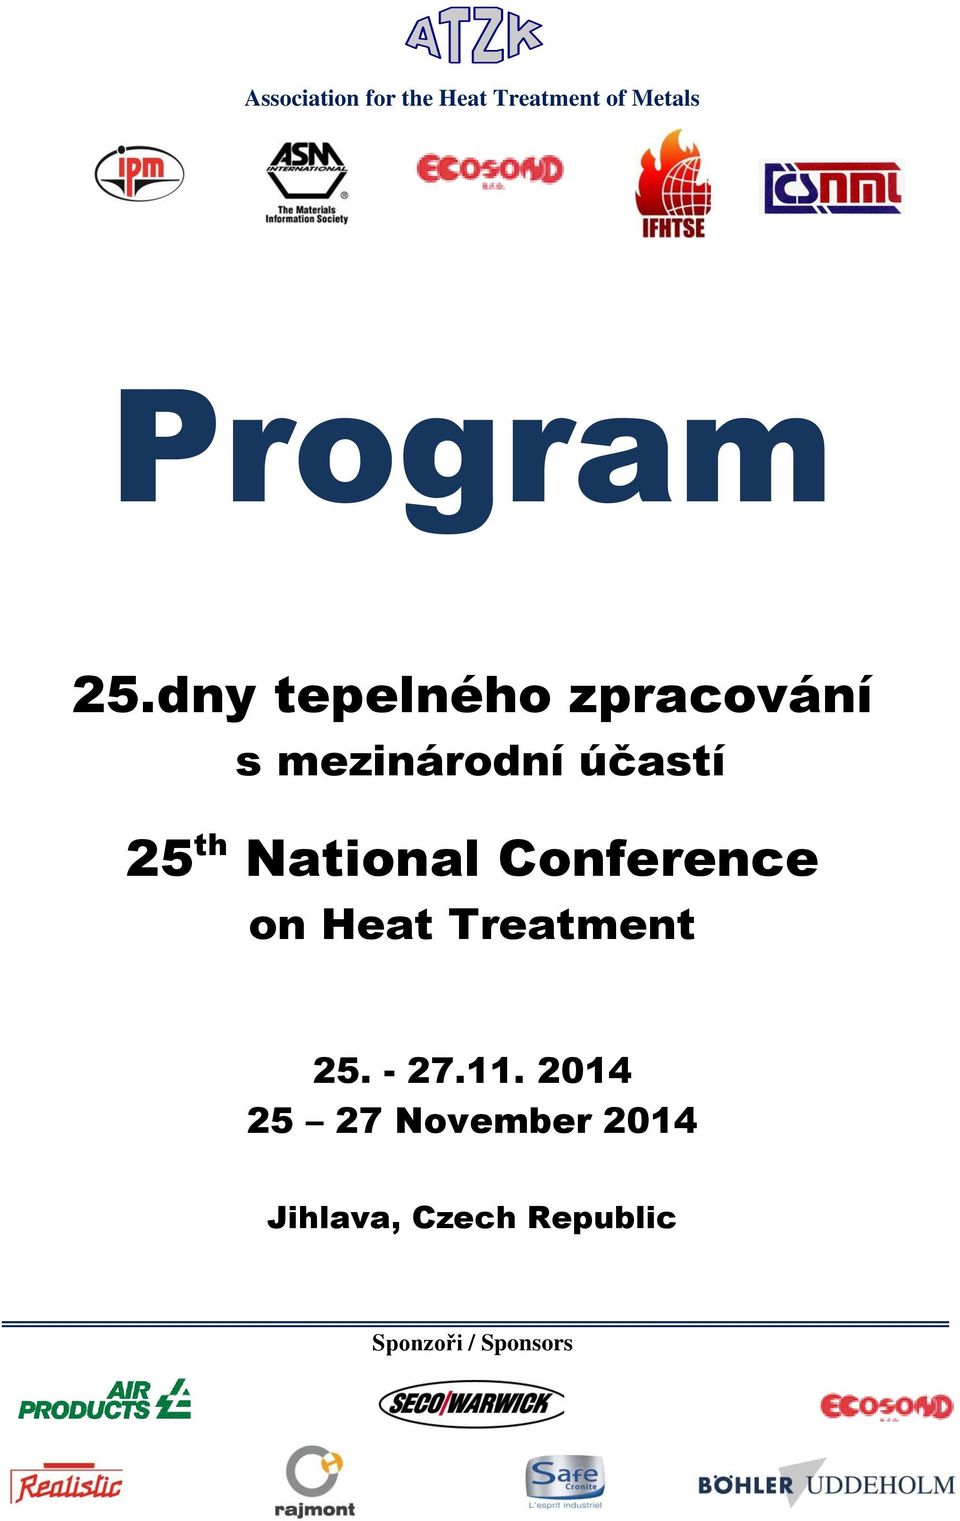 National Conference on Heat Treatment 25. - 27.11.